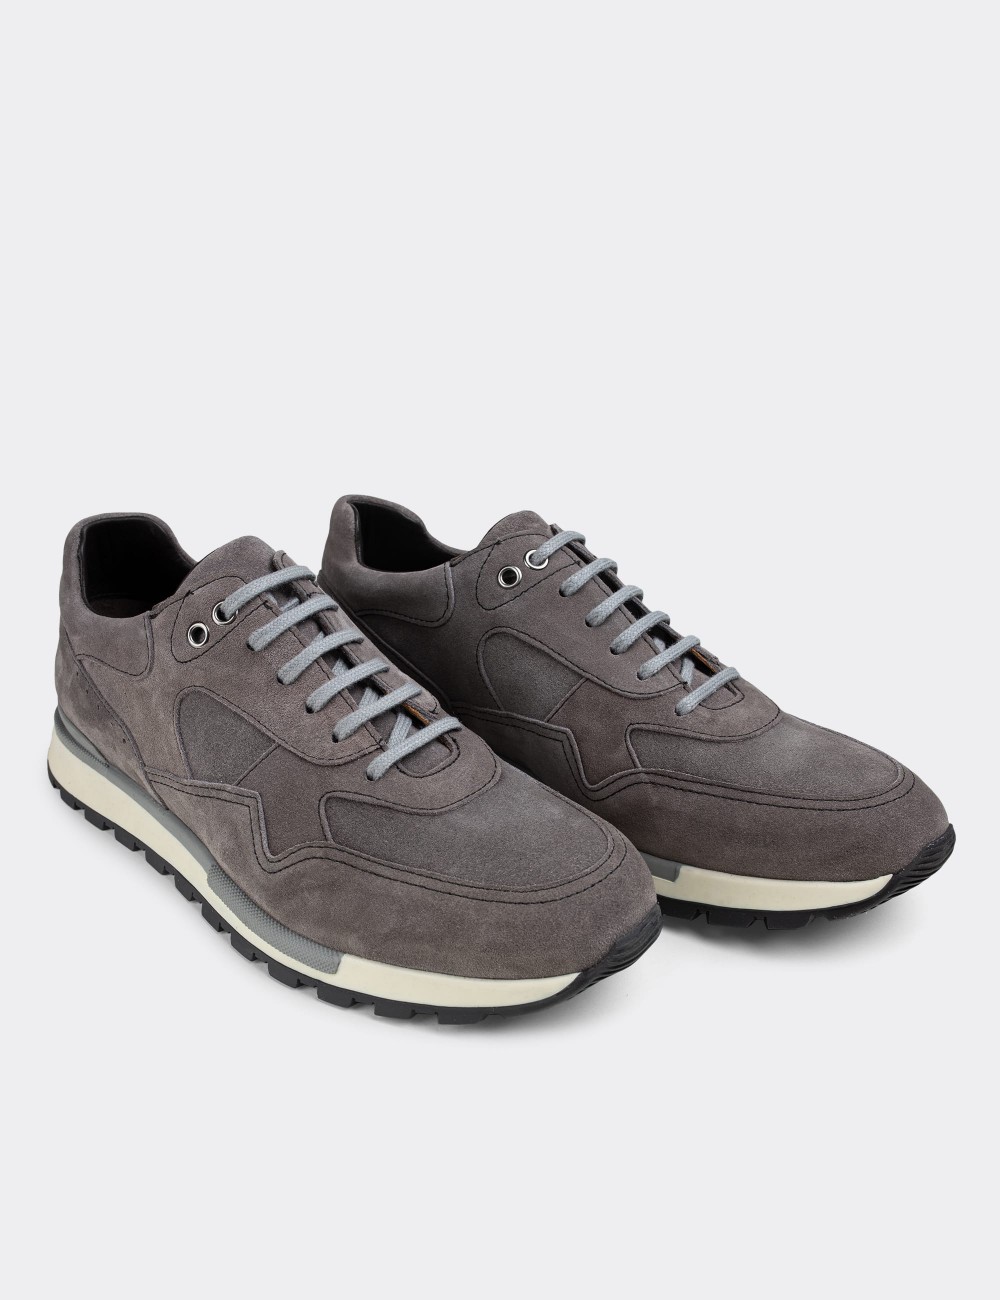 Gray Suede Leather Sneakers - 01818MGRIT01